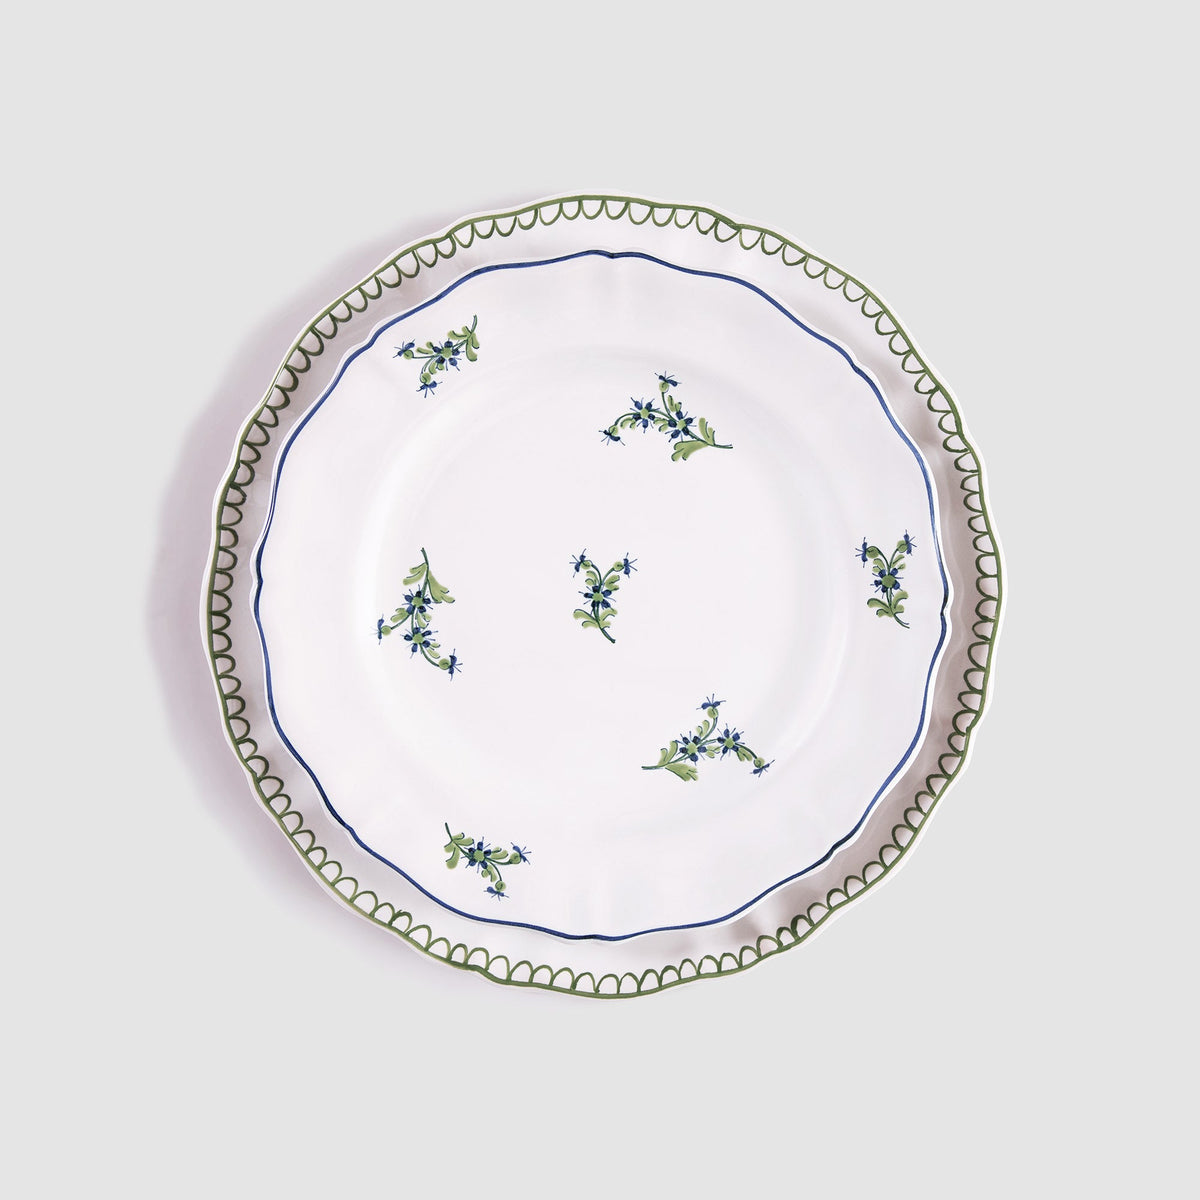 Bouclette Dinner Plate, Green with Les Bleuets Salad Plate